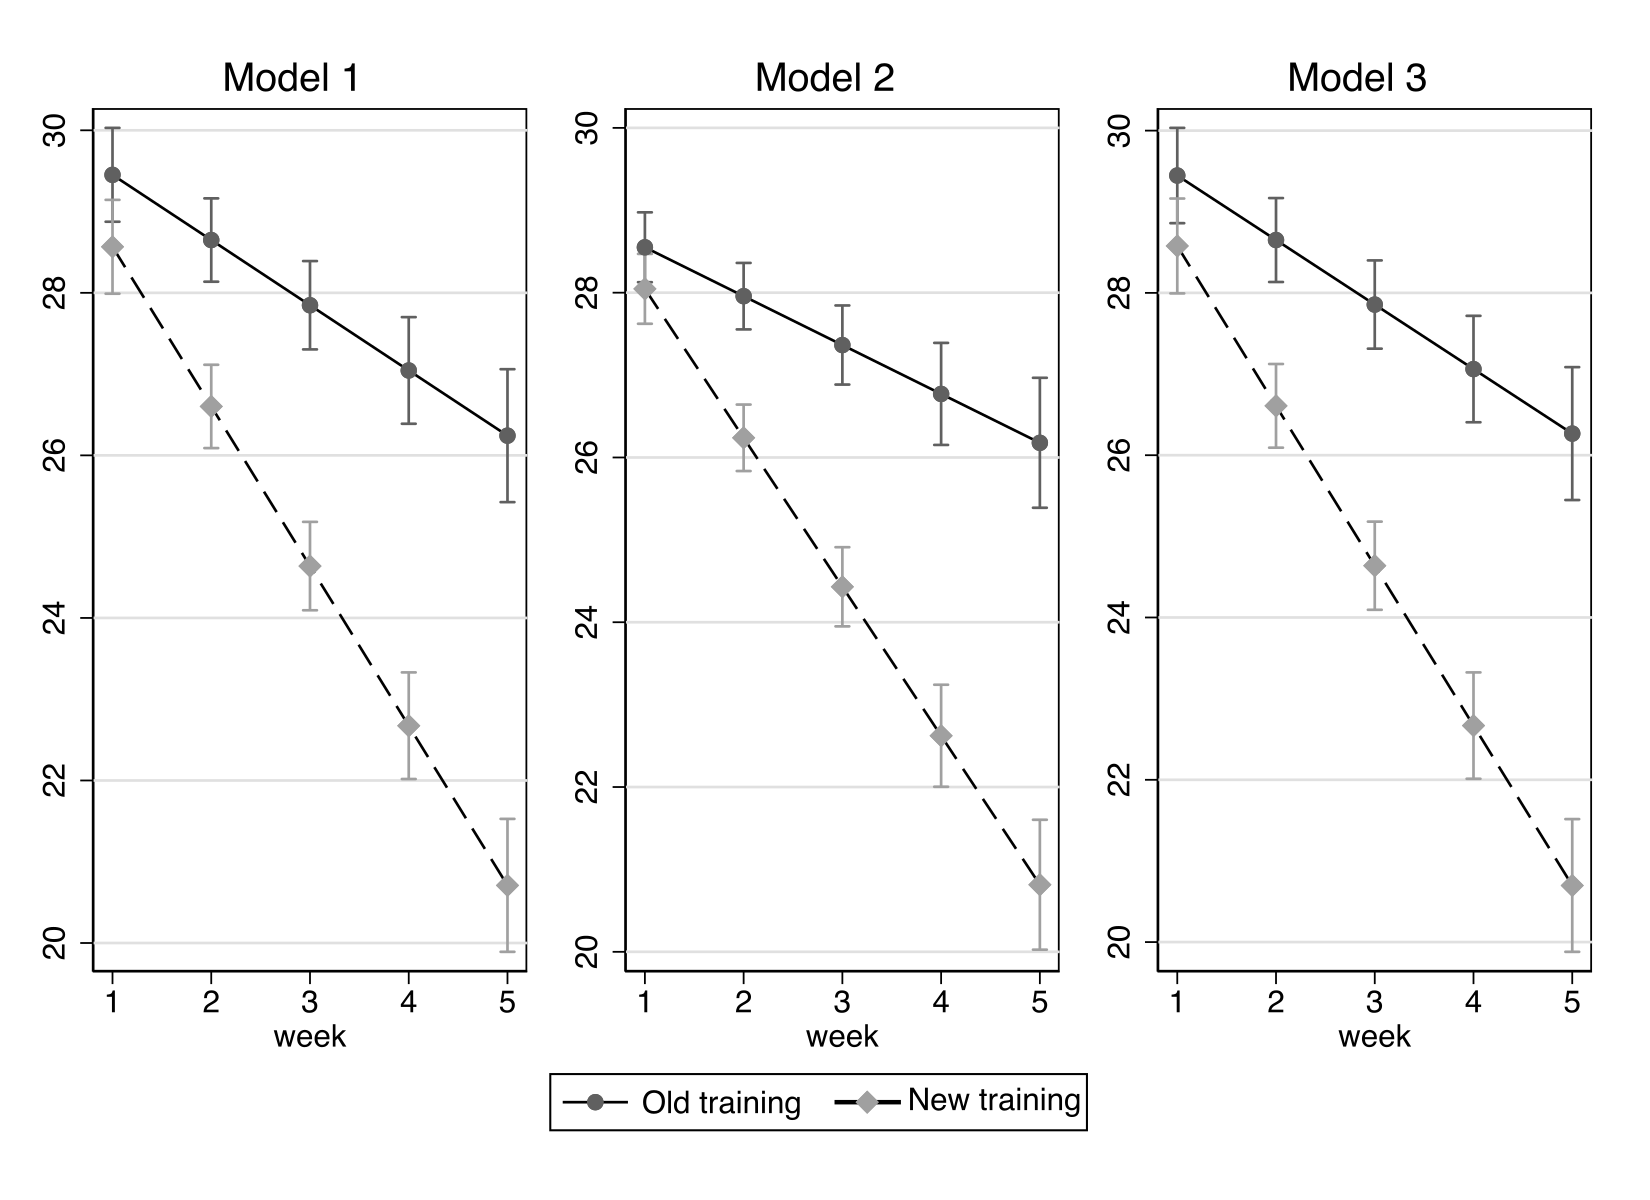 [Image: Stata output for a multilevel linear regression]